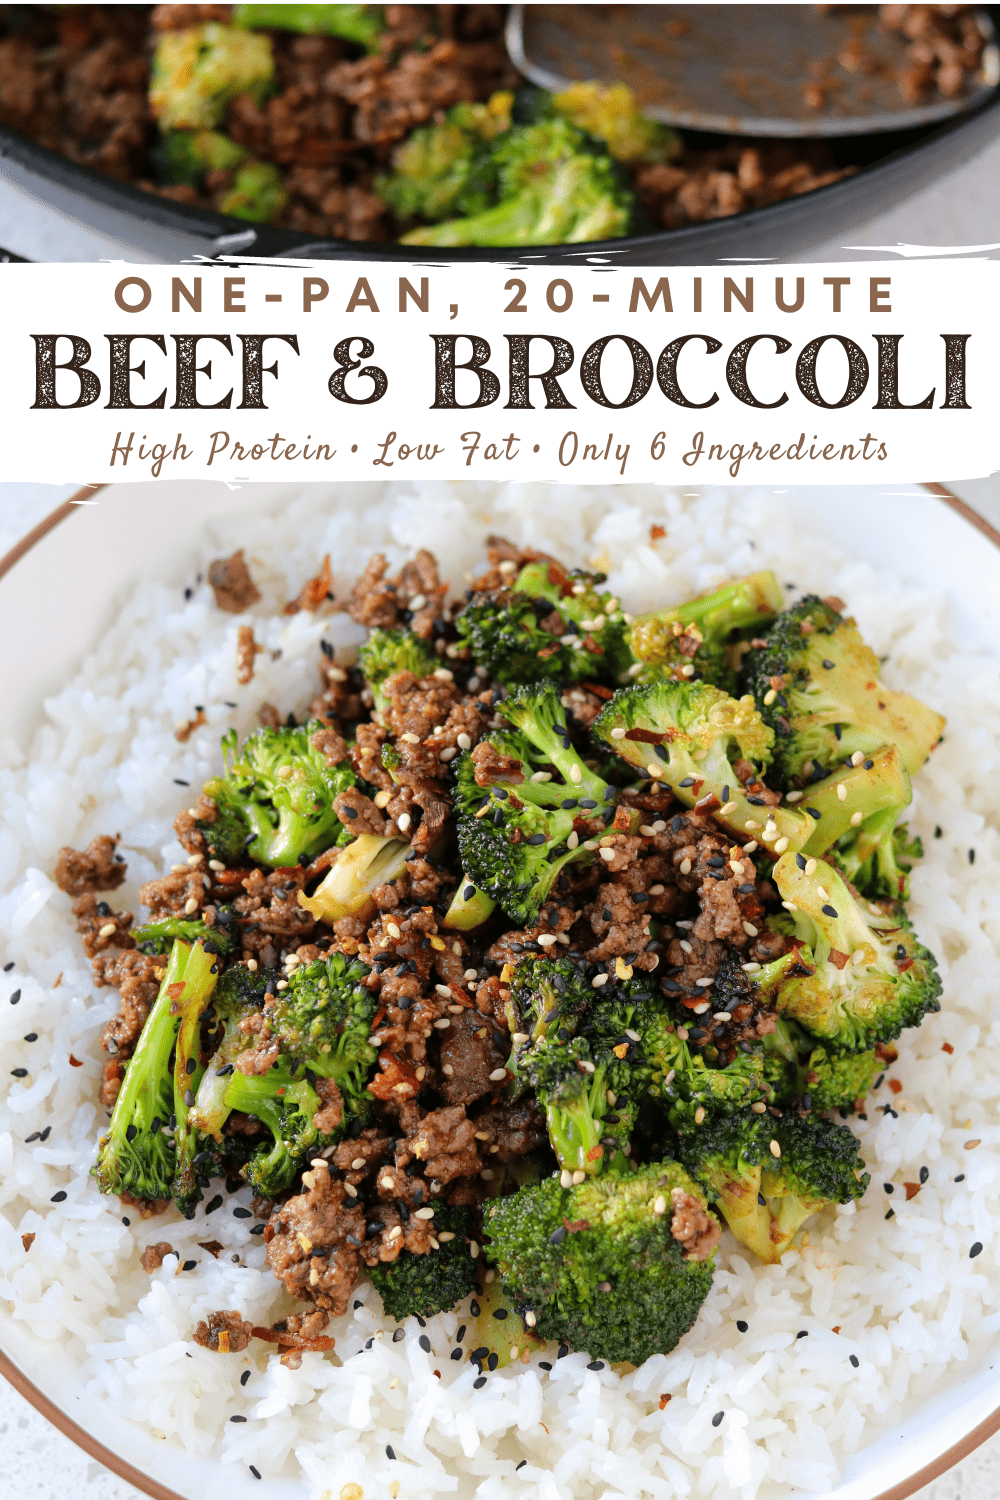 Sticky Sweet Ground Beef and Broccoli - Kinda Healthy Recipes